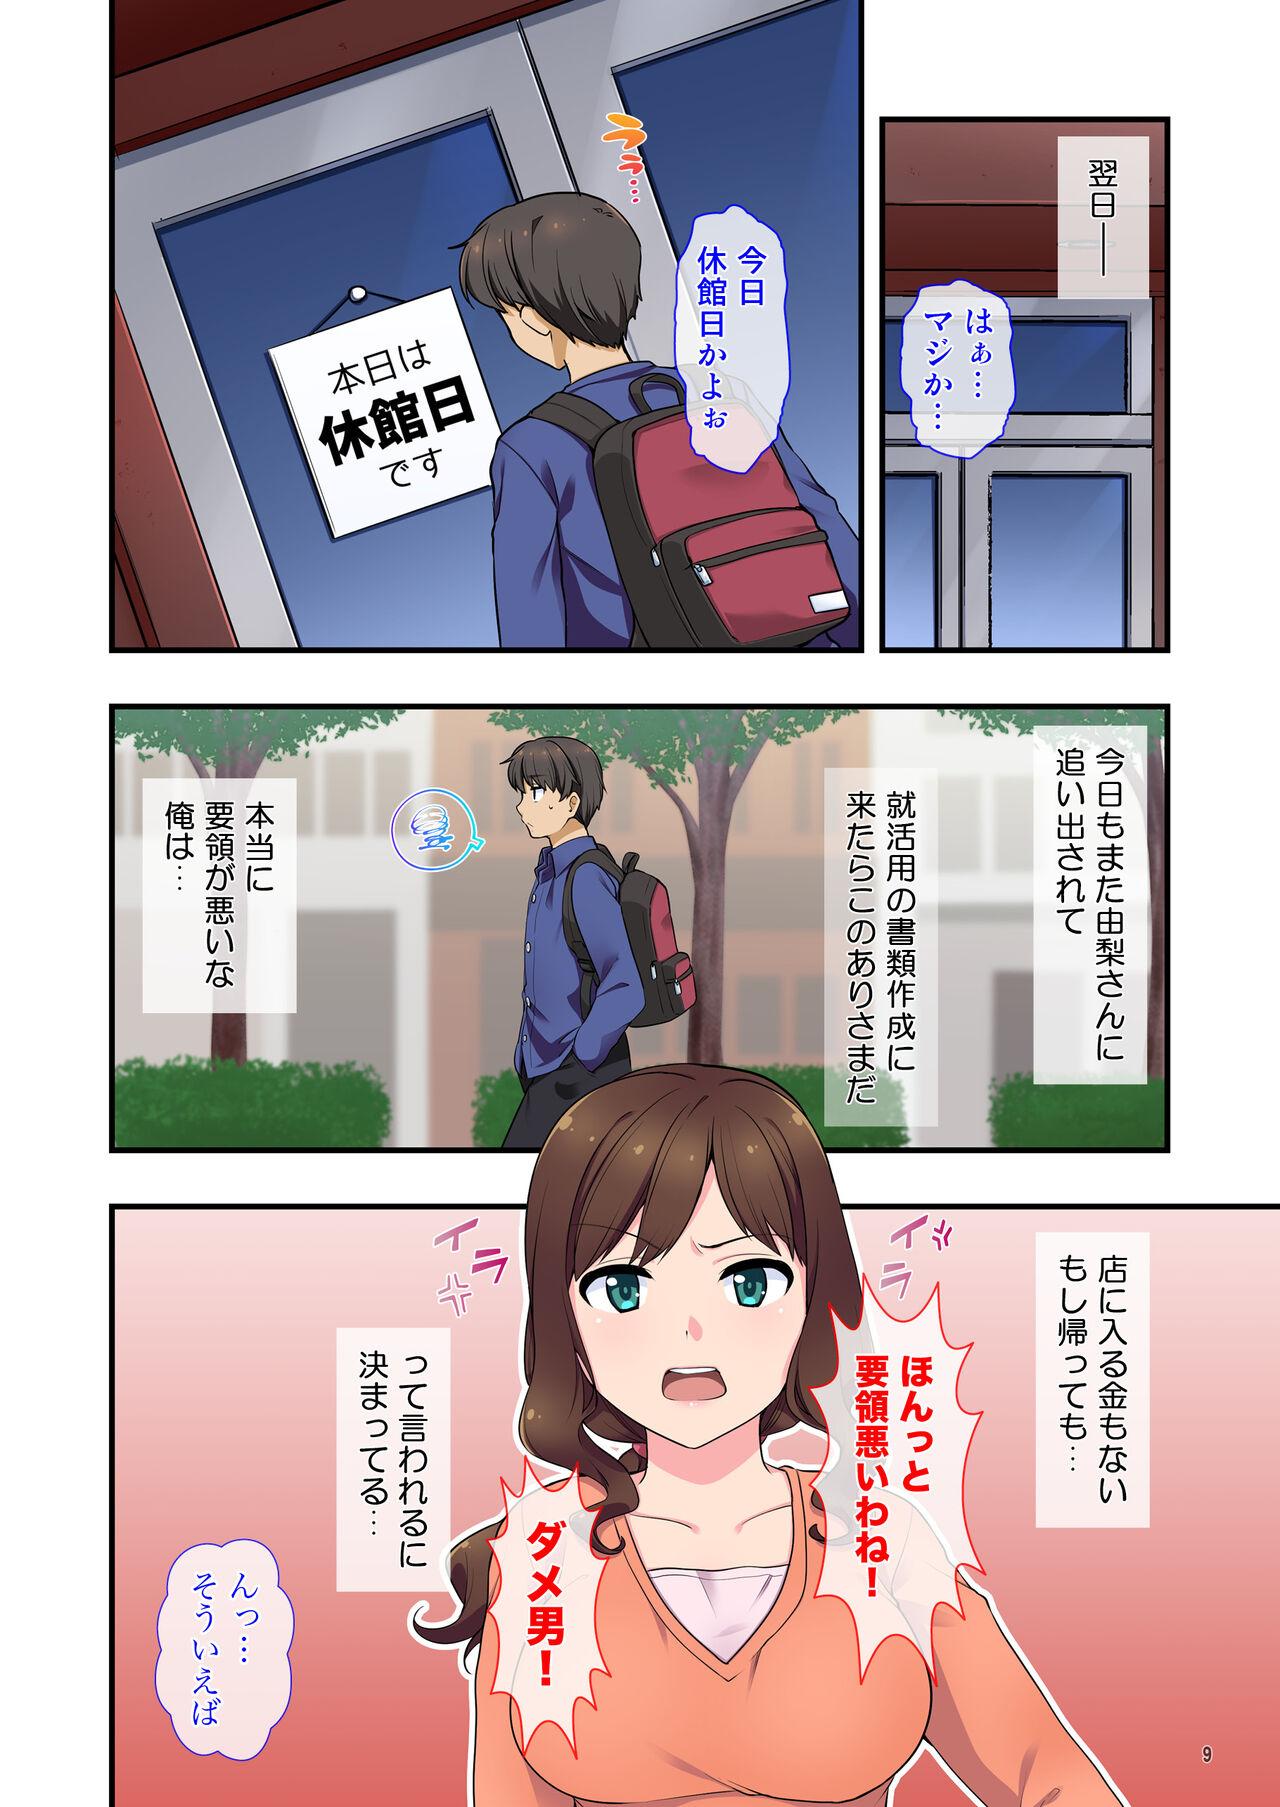 Picked Up イヤミな兄嫁のエロ裏アカ発見！？ 〜兄貴にバラすと迫ってみたら〜 - Original Family Roleplay - Page 9